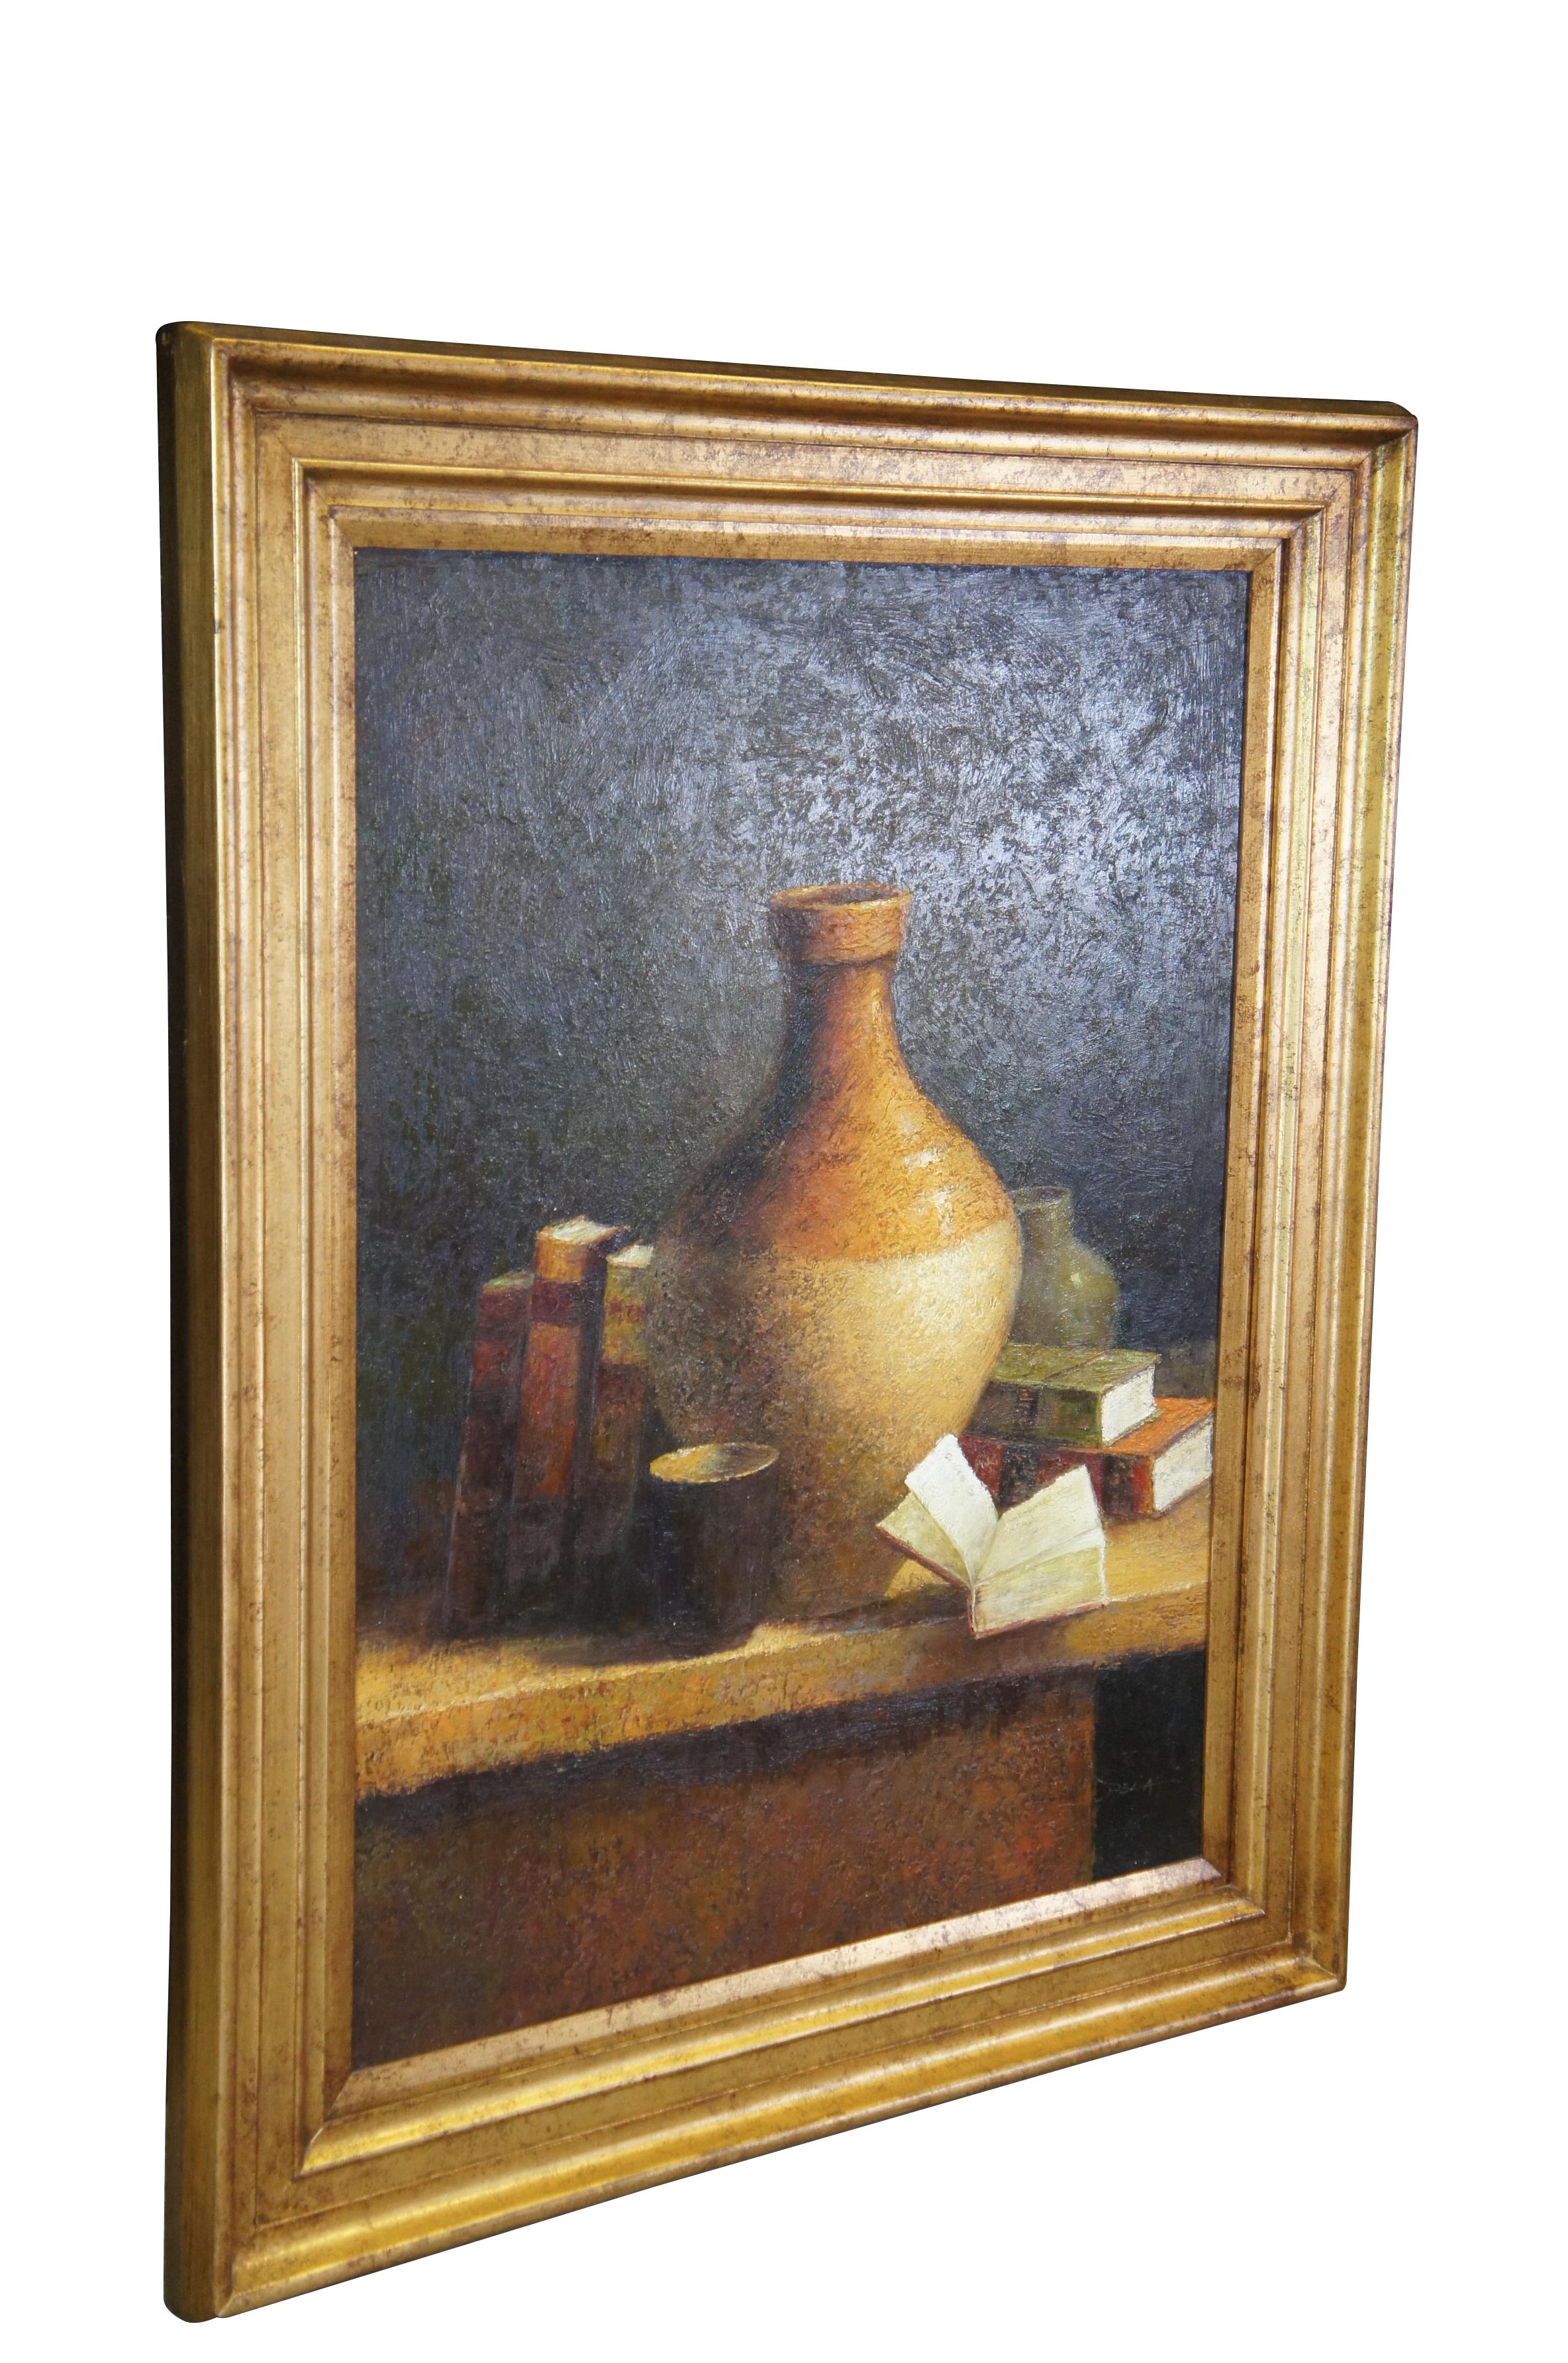 A large realist still life oil painting on canvas, circa 1990s. Signed by Delia lower left.  Features a Southwestern / Tuscan library or study scene with books and vases on a table.  The painting is framed in pine with a gold finish. Includes a COA